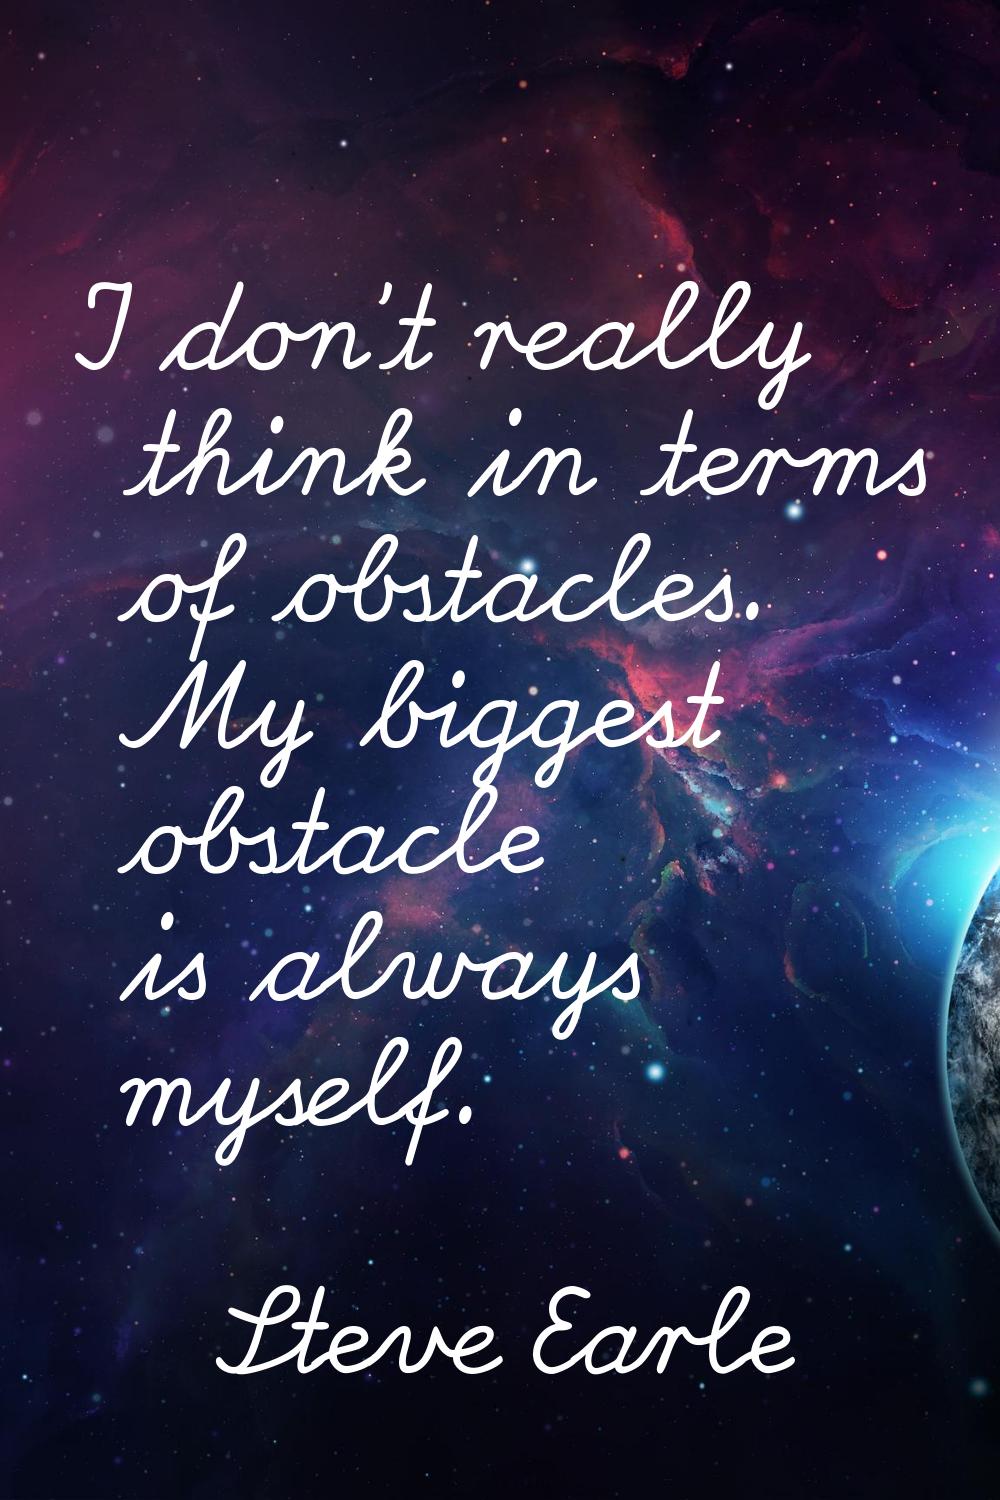 I don't really think in terms of obstacles. My biggest obstacle is always myself.